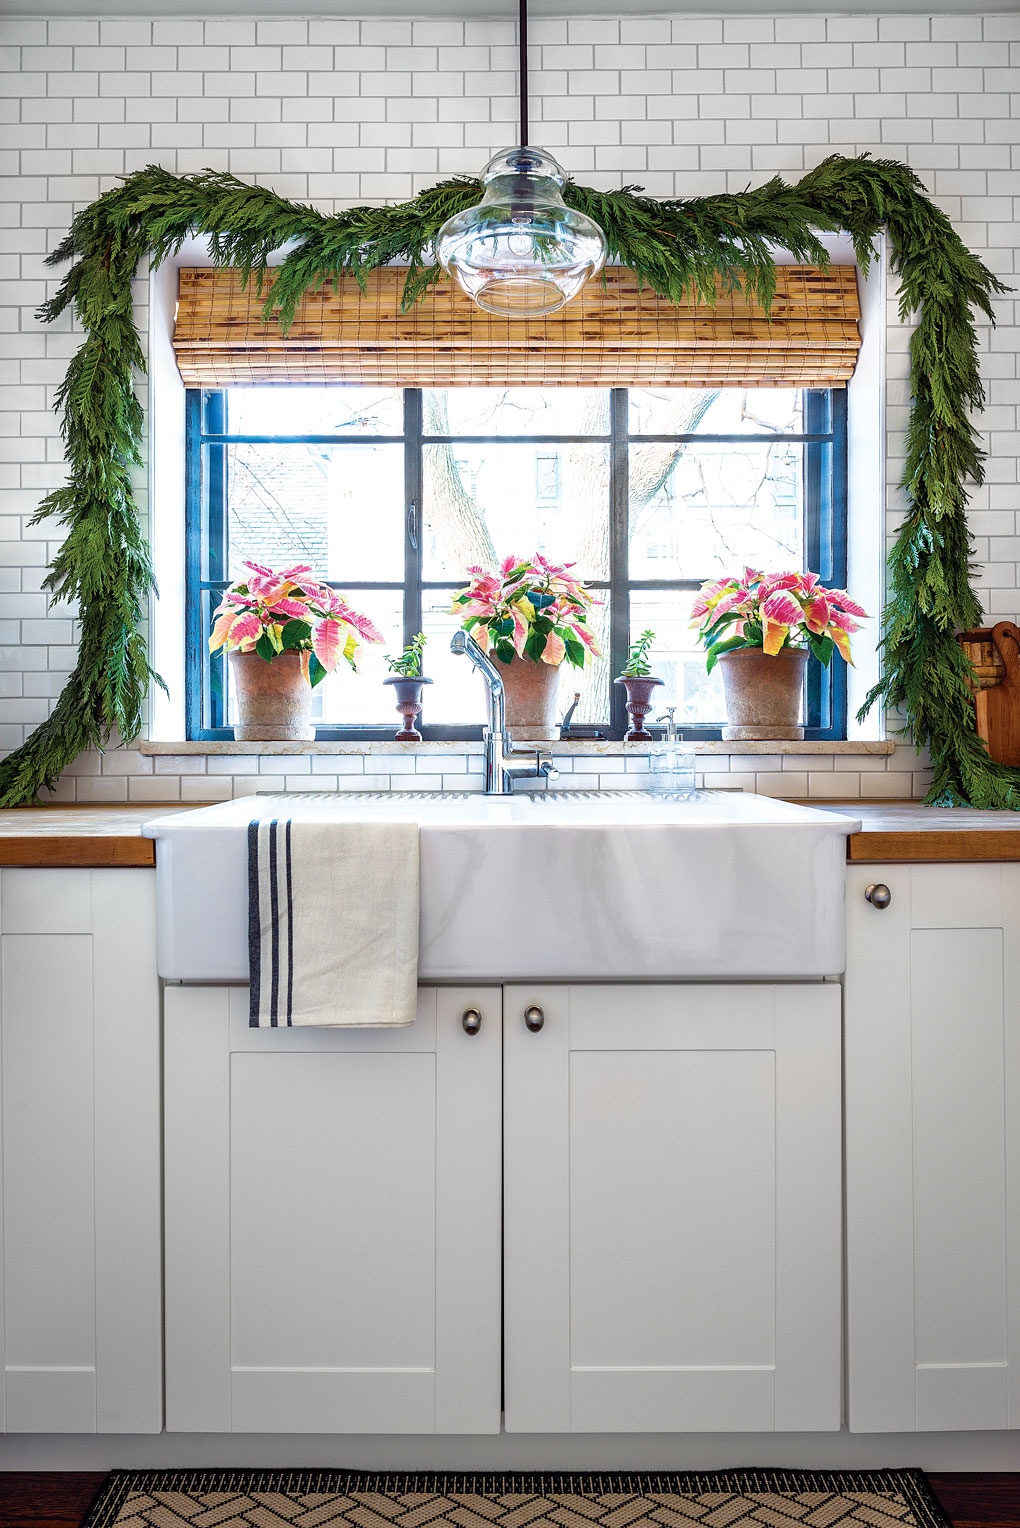 Modern farmhouse styled kitchen in white with bamboo window coverings and Christmas greenery over the window with poinsettia accents. 